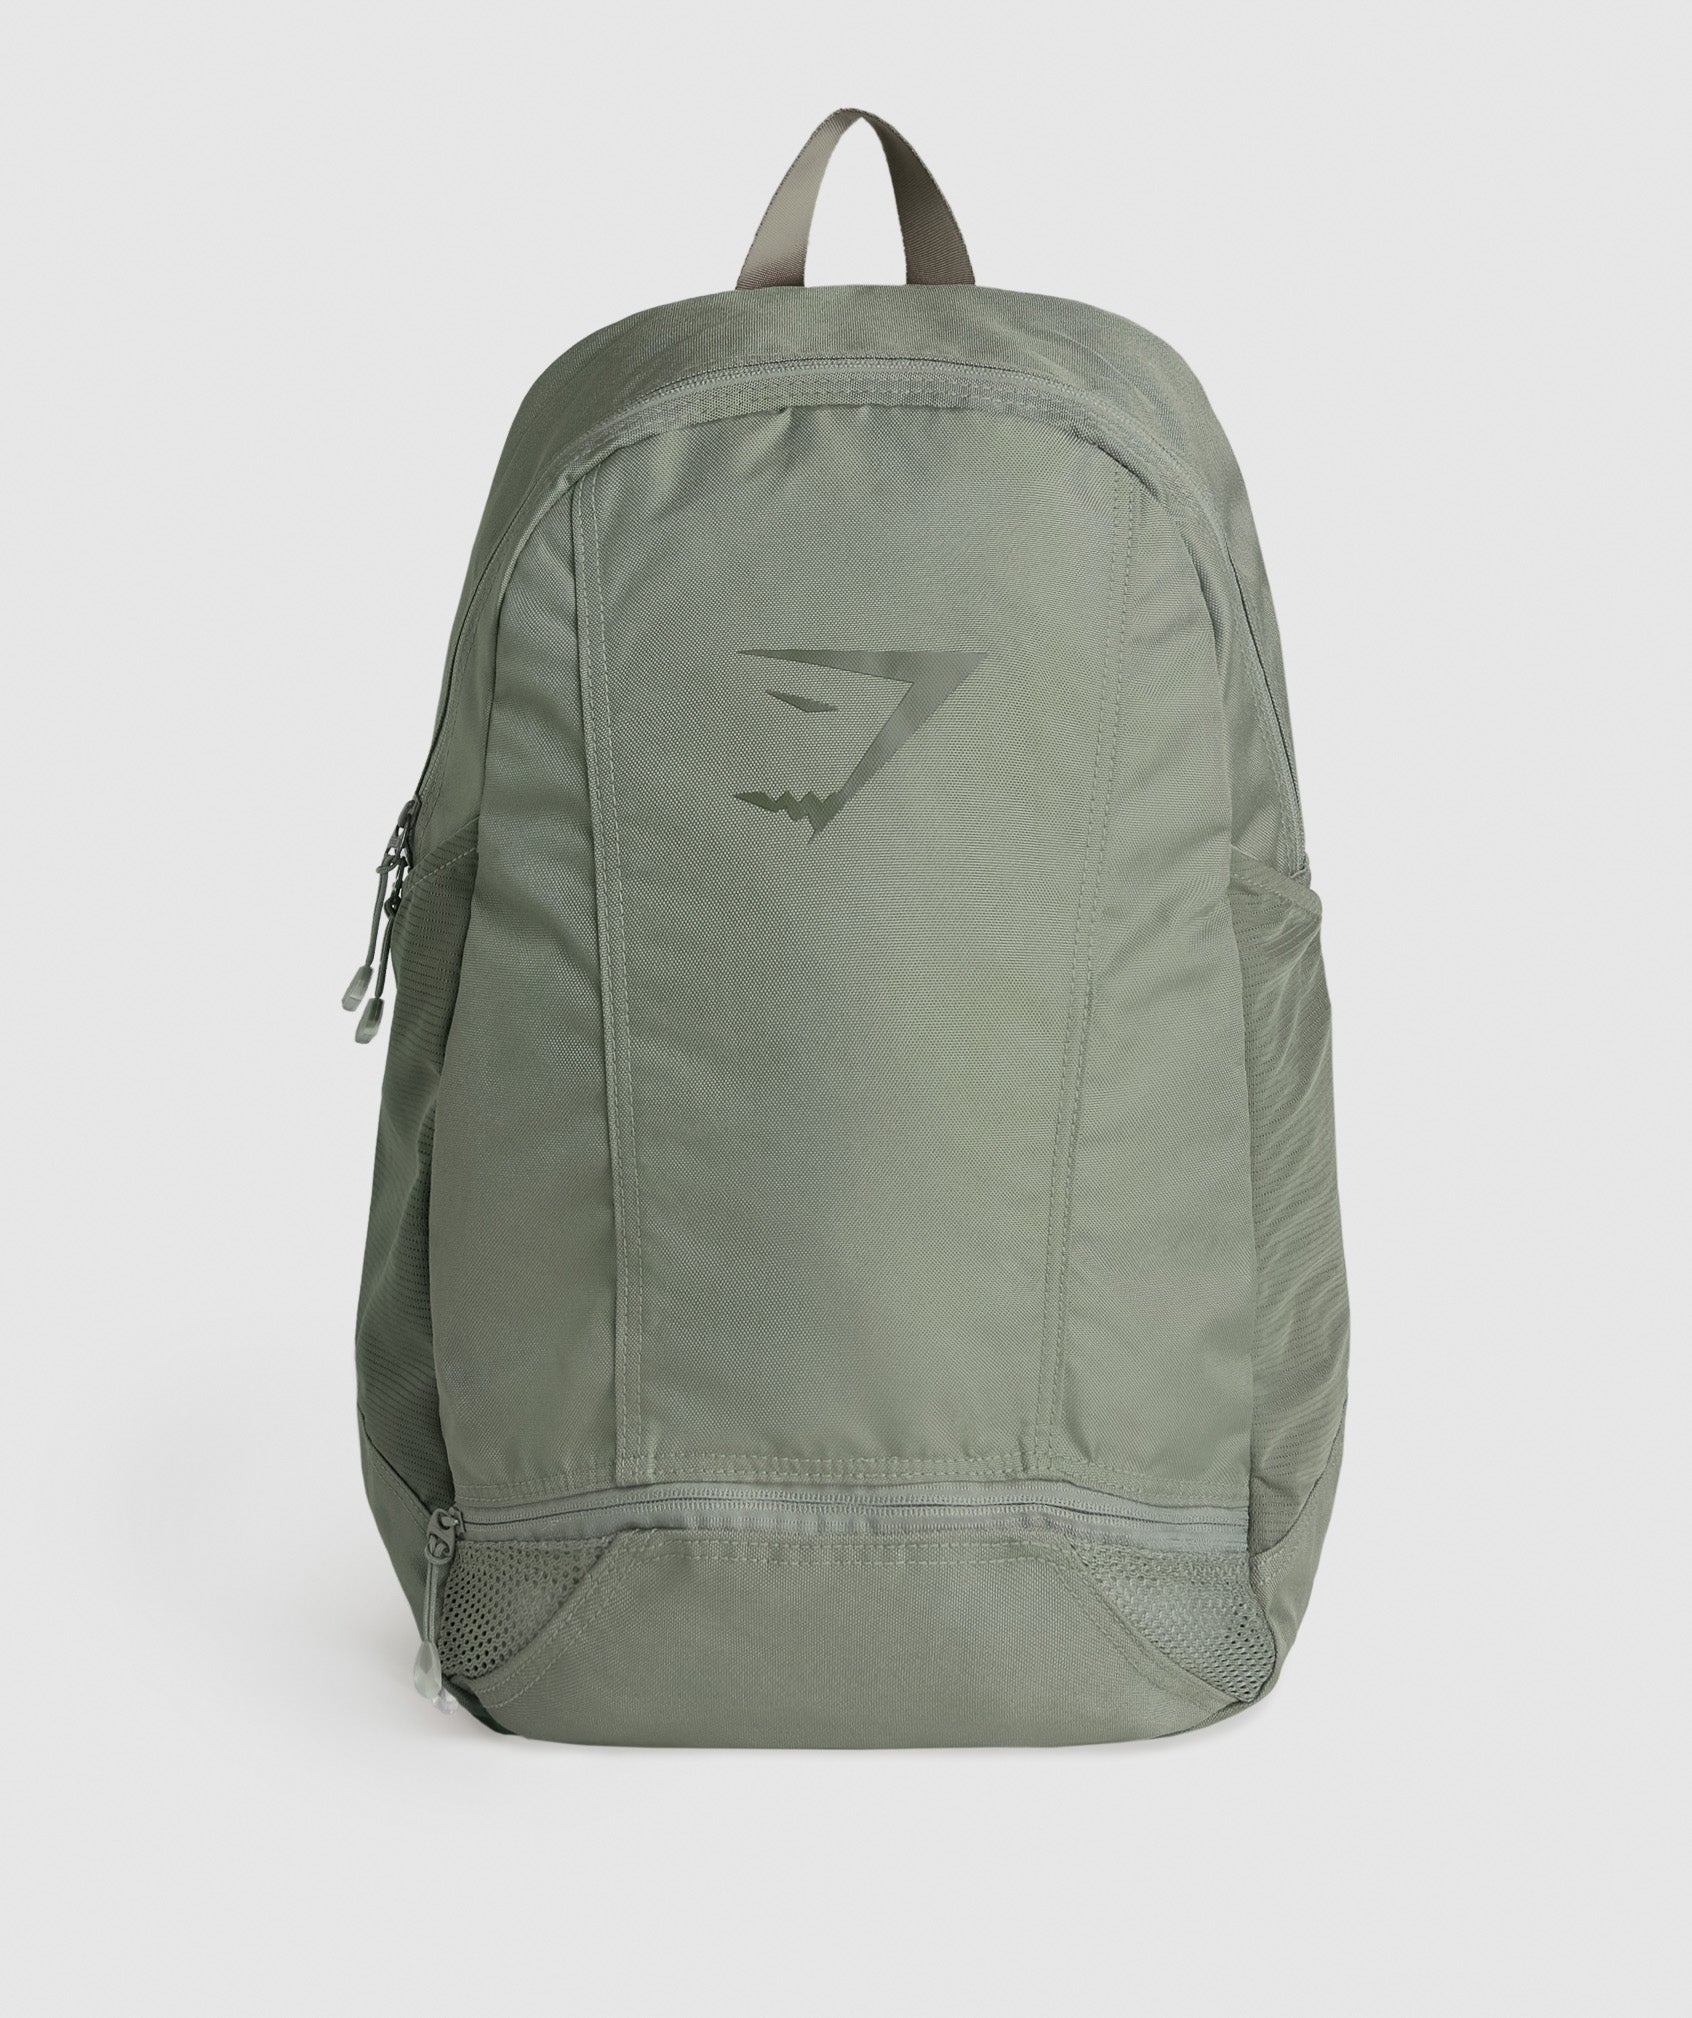 Sharkhead Backpack in Unit Green - view 1